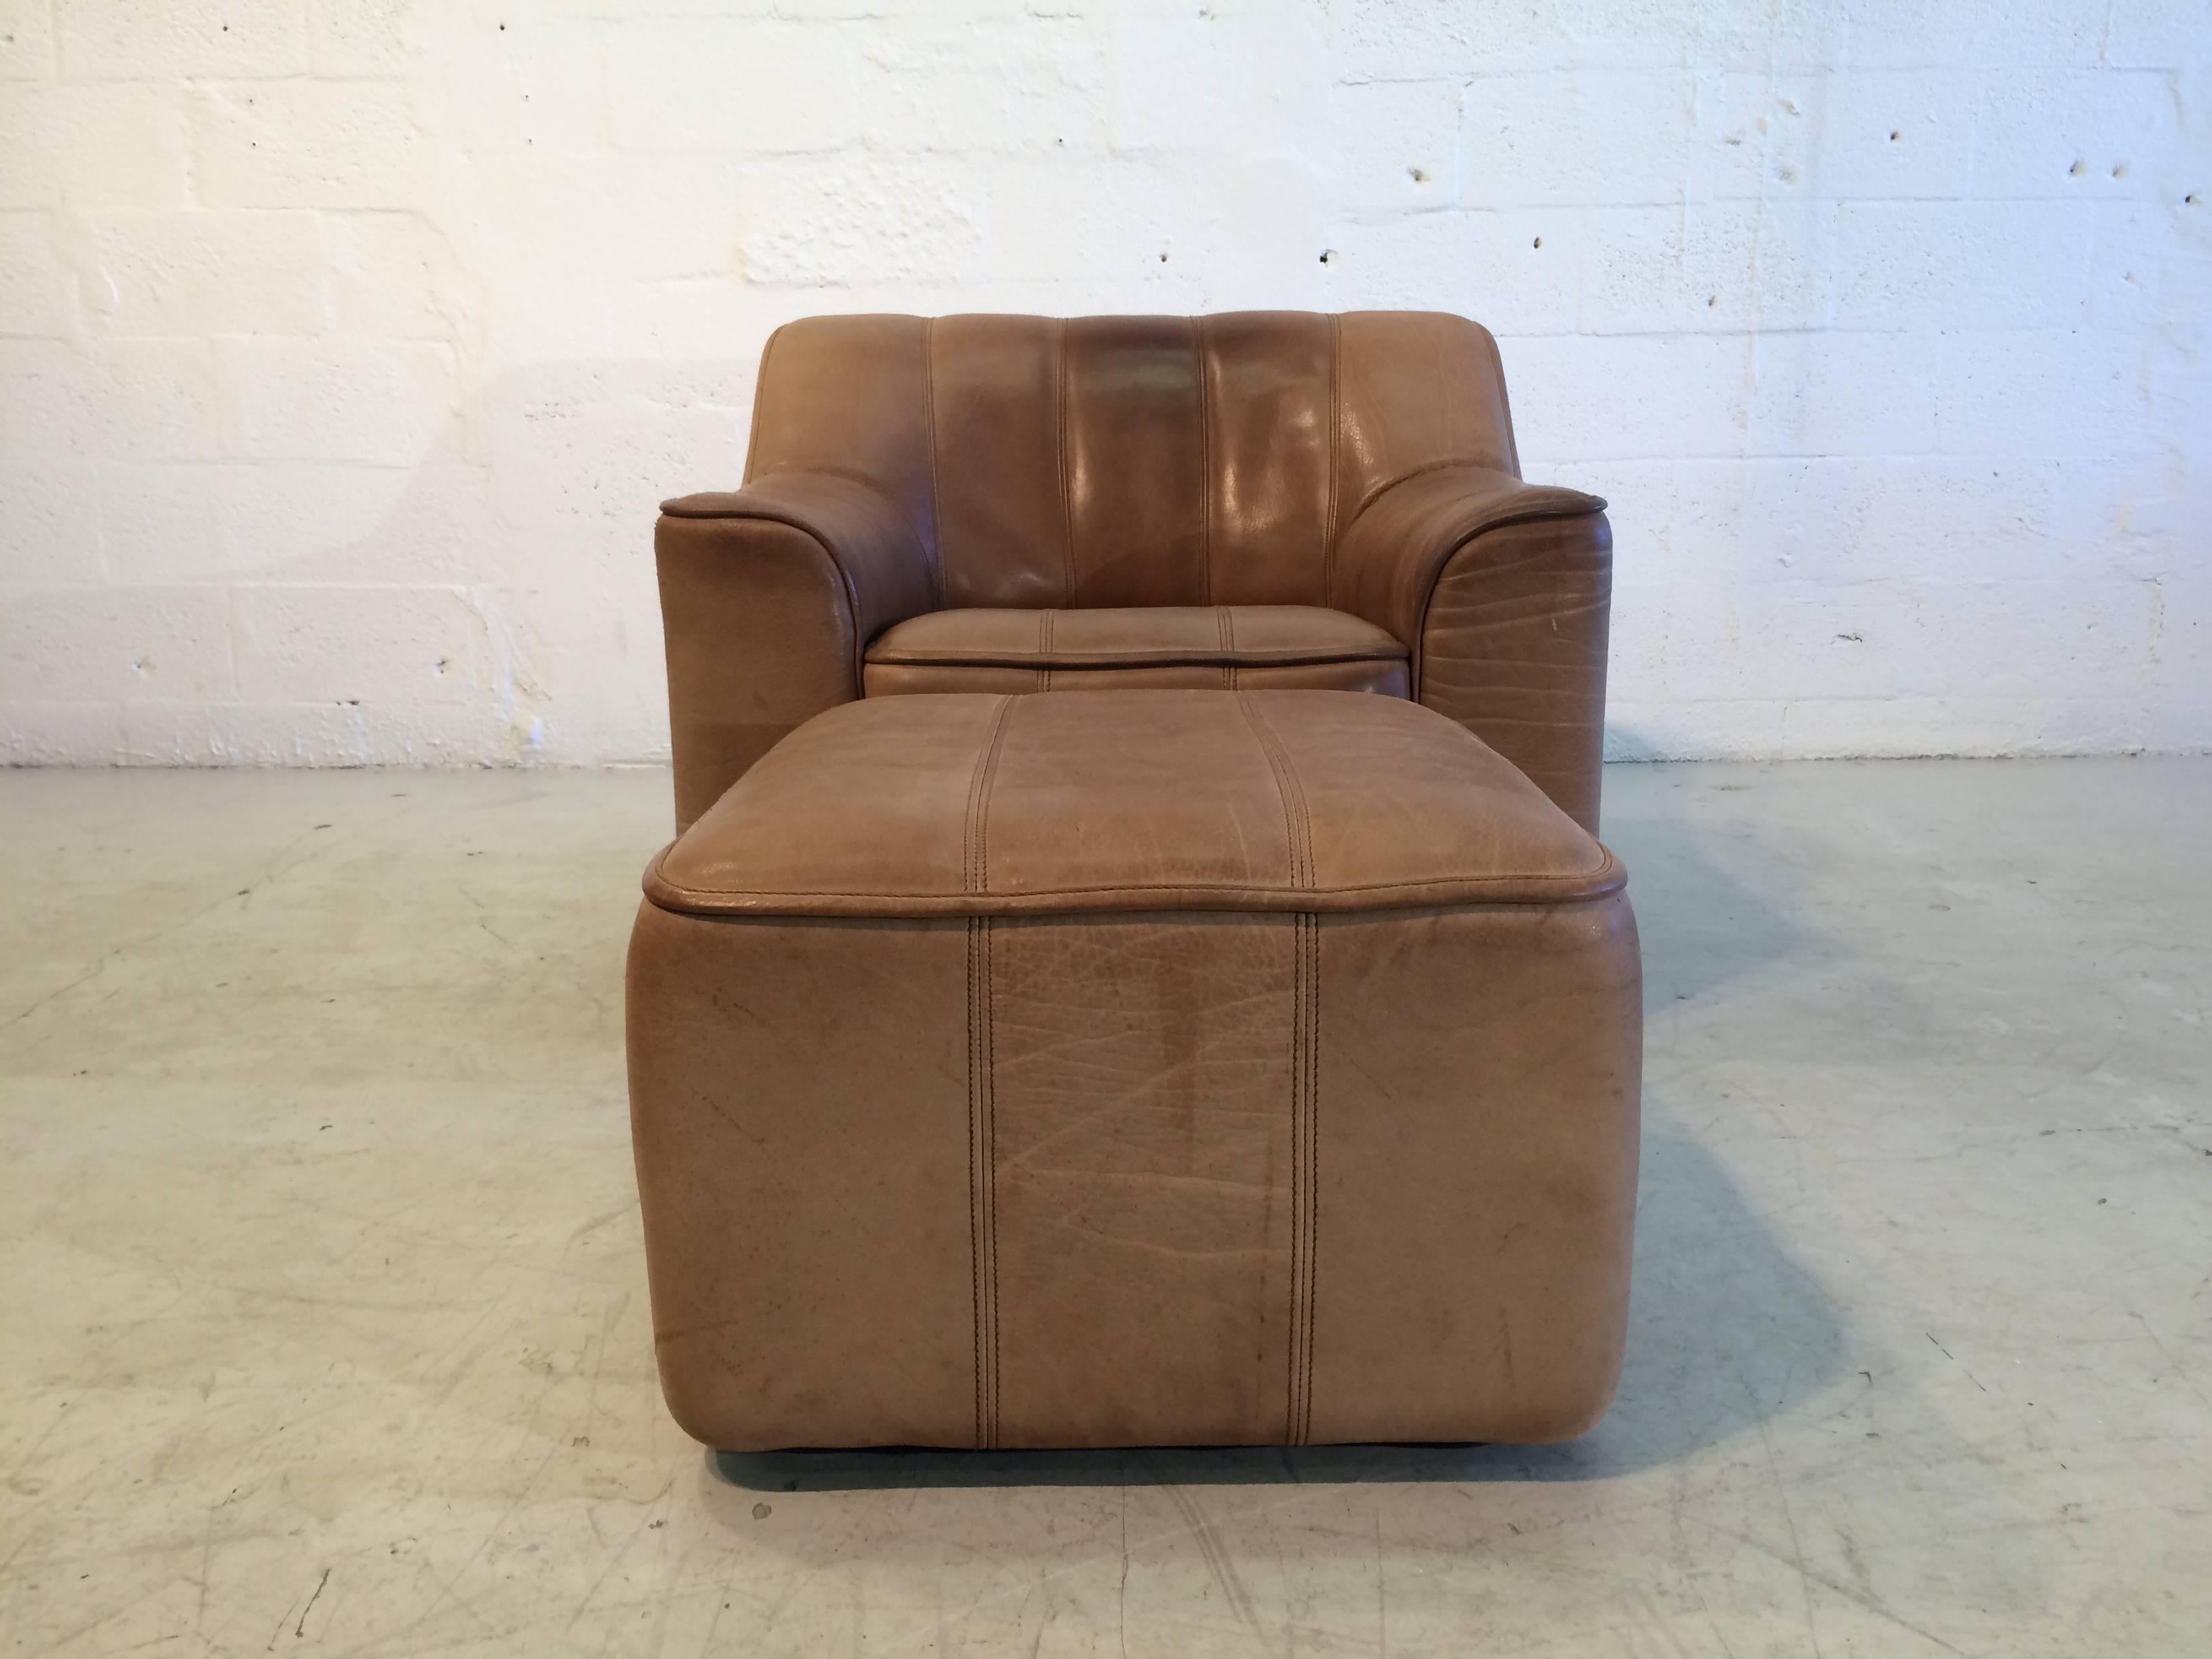 Easy chair with ottoman model DS-44 in thick buffalo leather with a nice patina. Produced by De Sede in Switzerland.
Measures: Ottoman is 14